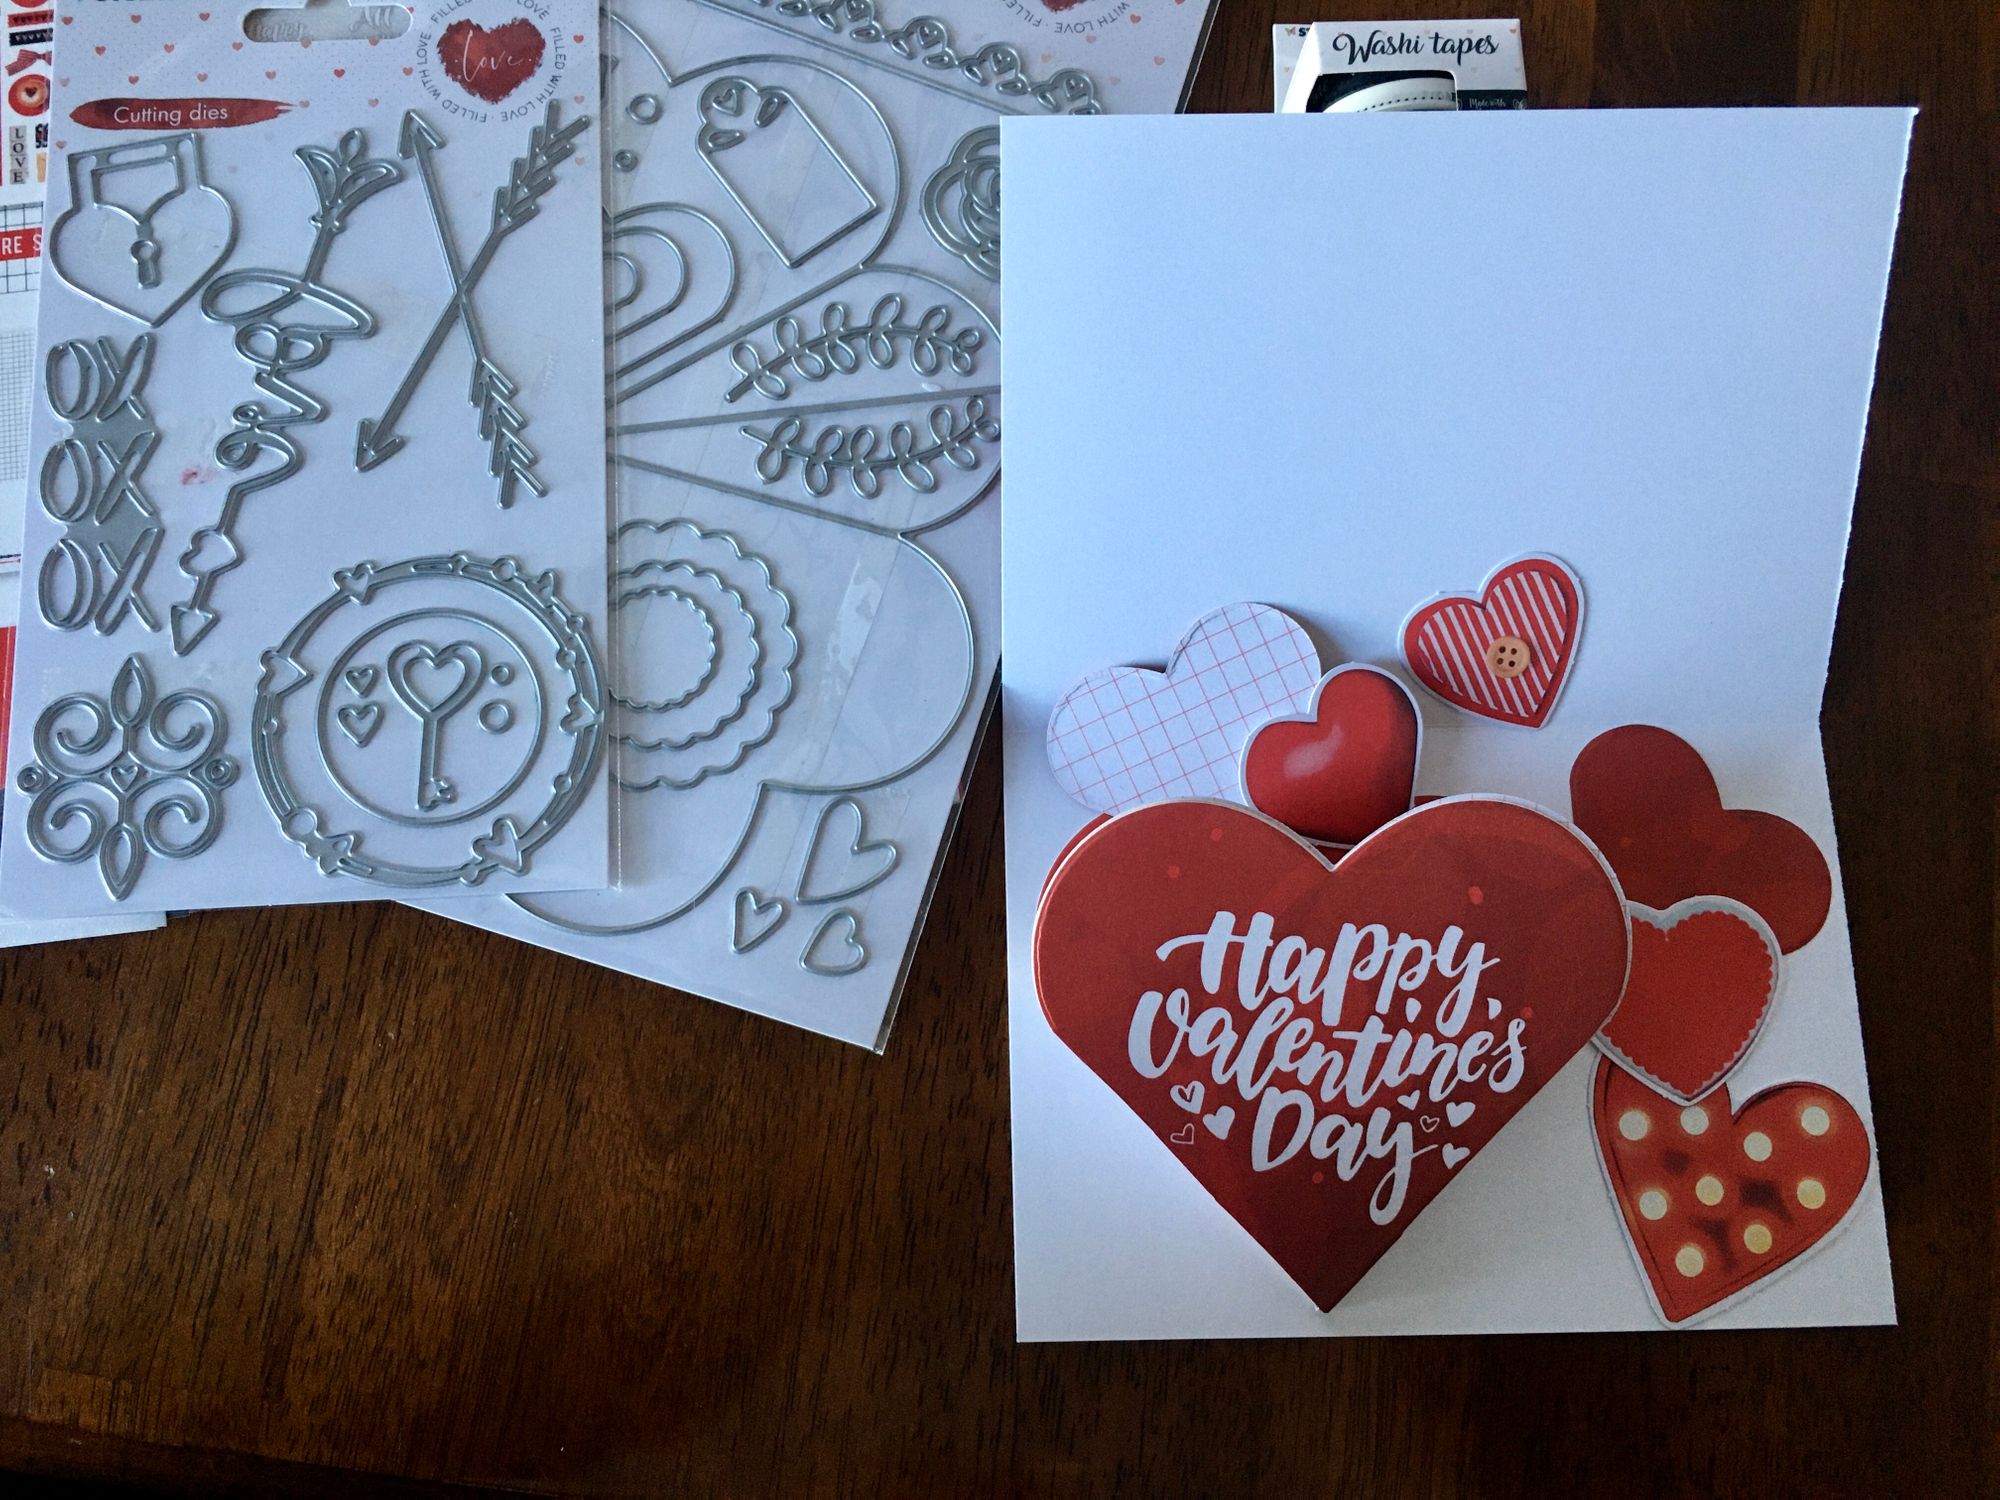 Homemade Washi Tape Heart cards for Valentine's Day